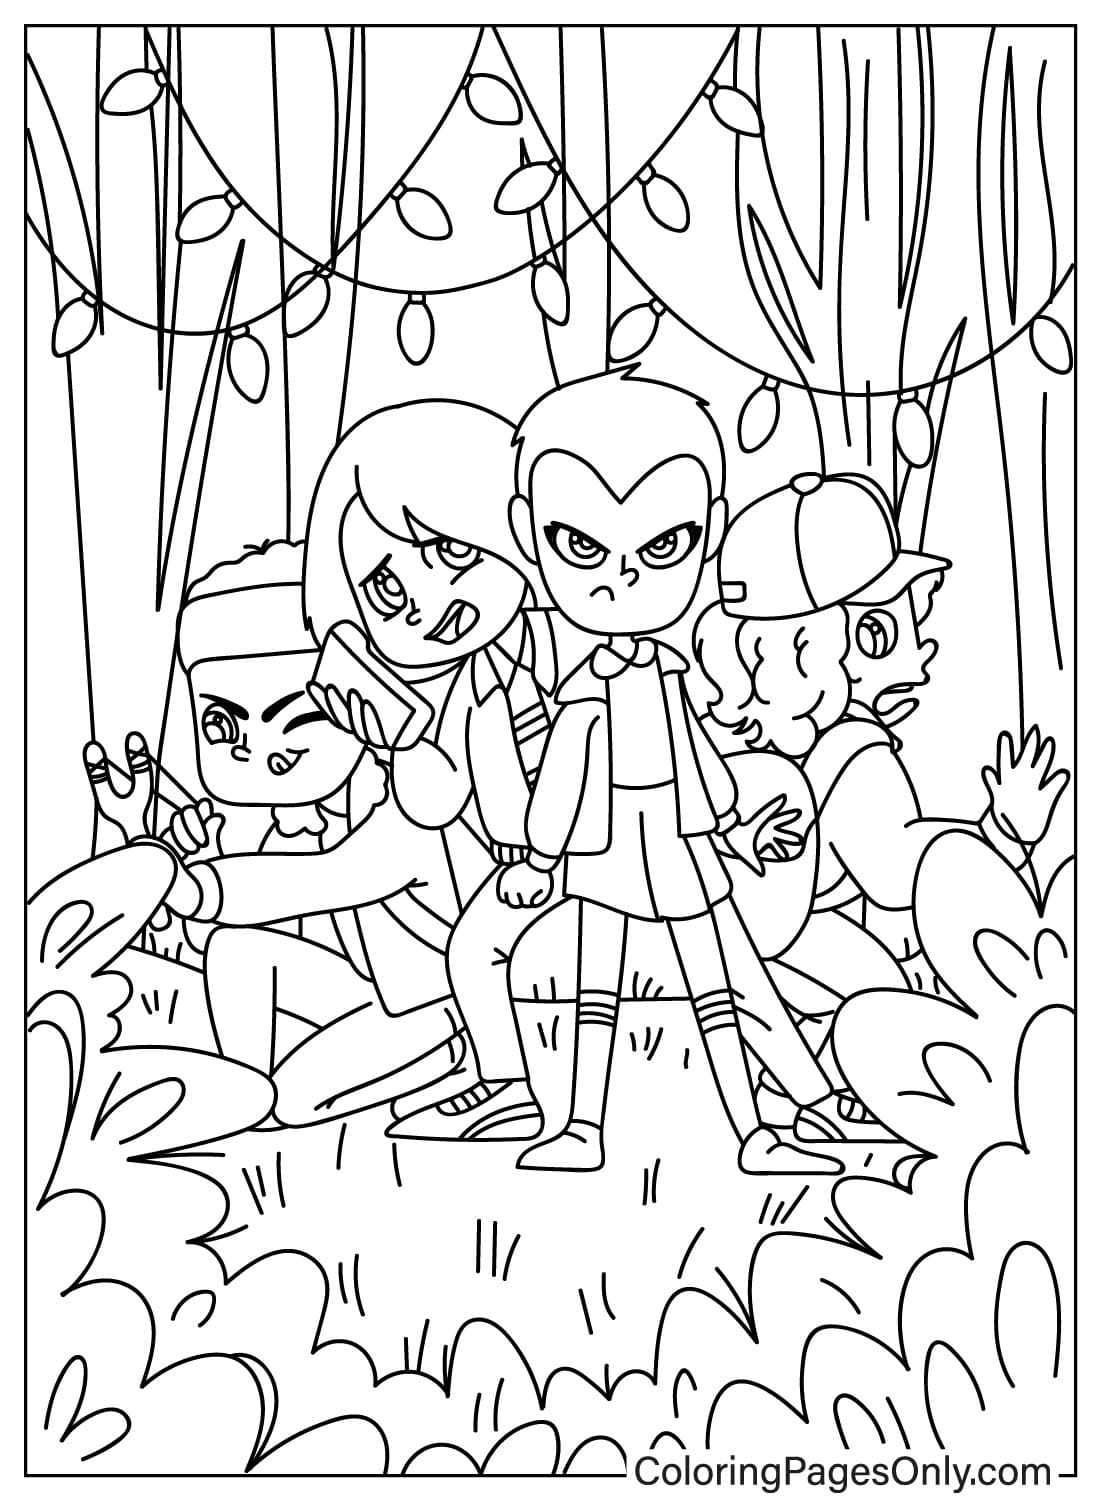 Stranger Things Coloring Page Free from Stranger Things